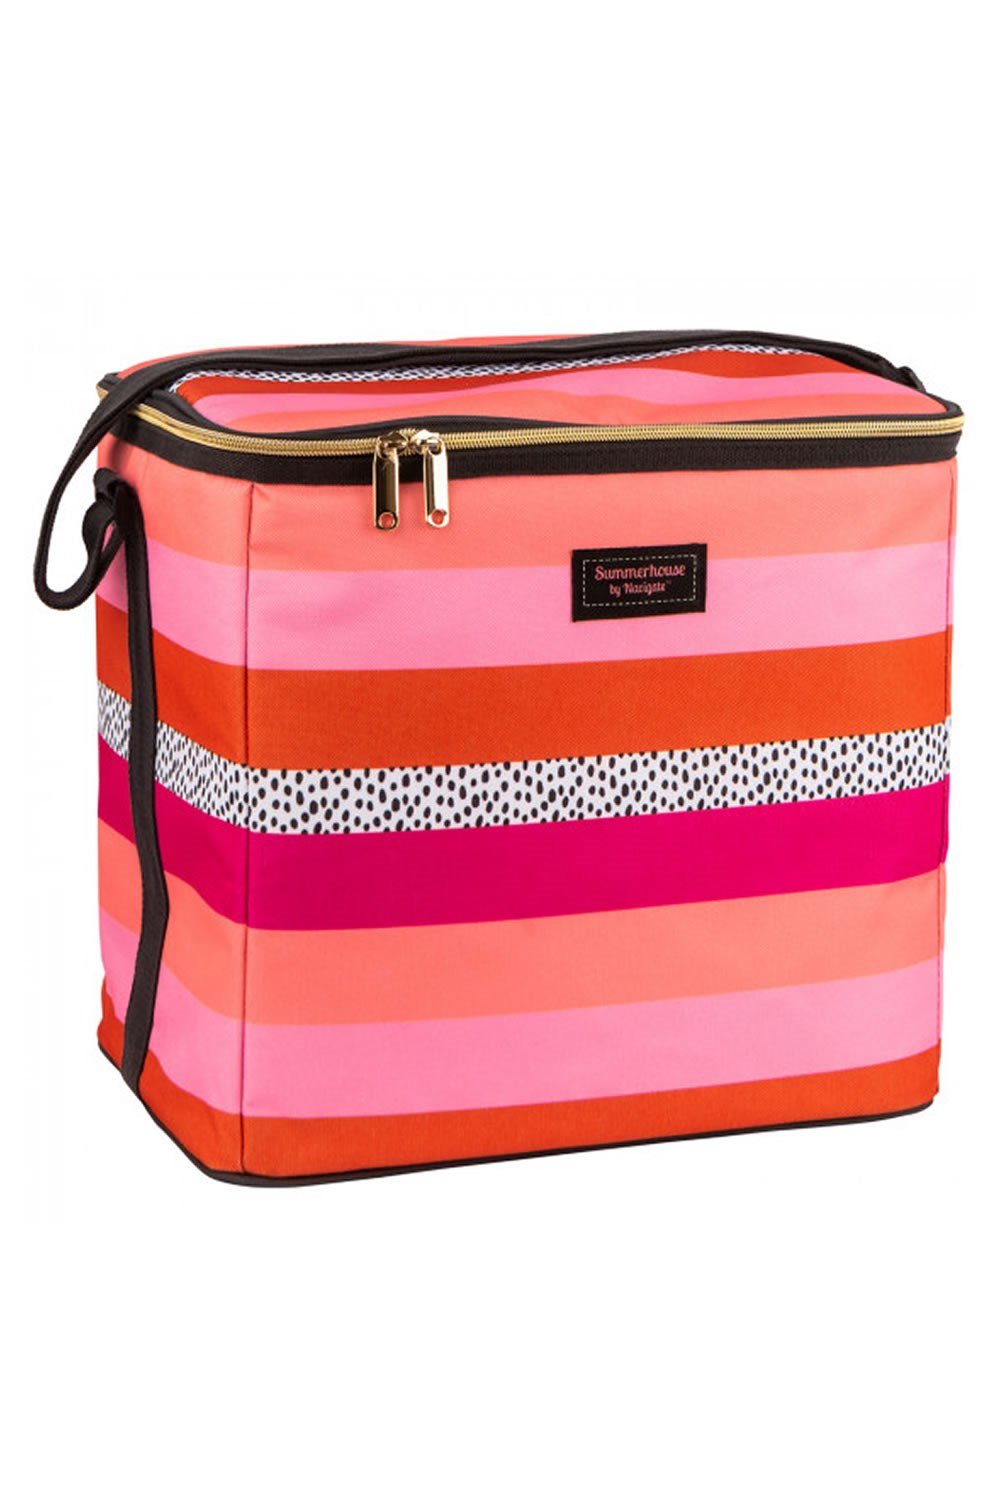 Tribal Fusion Stripe 20l Insulated Cooler Bag -